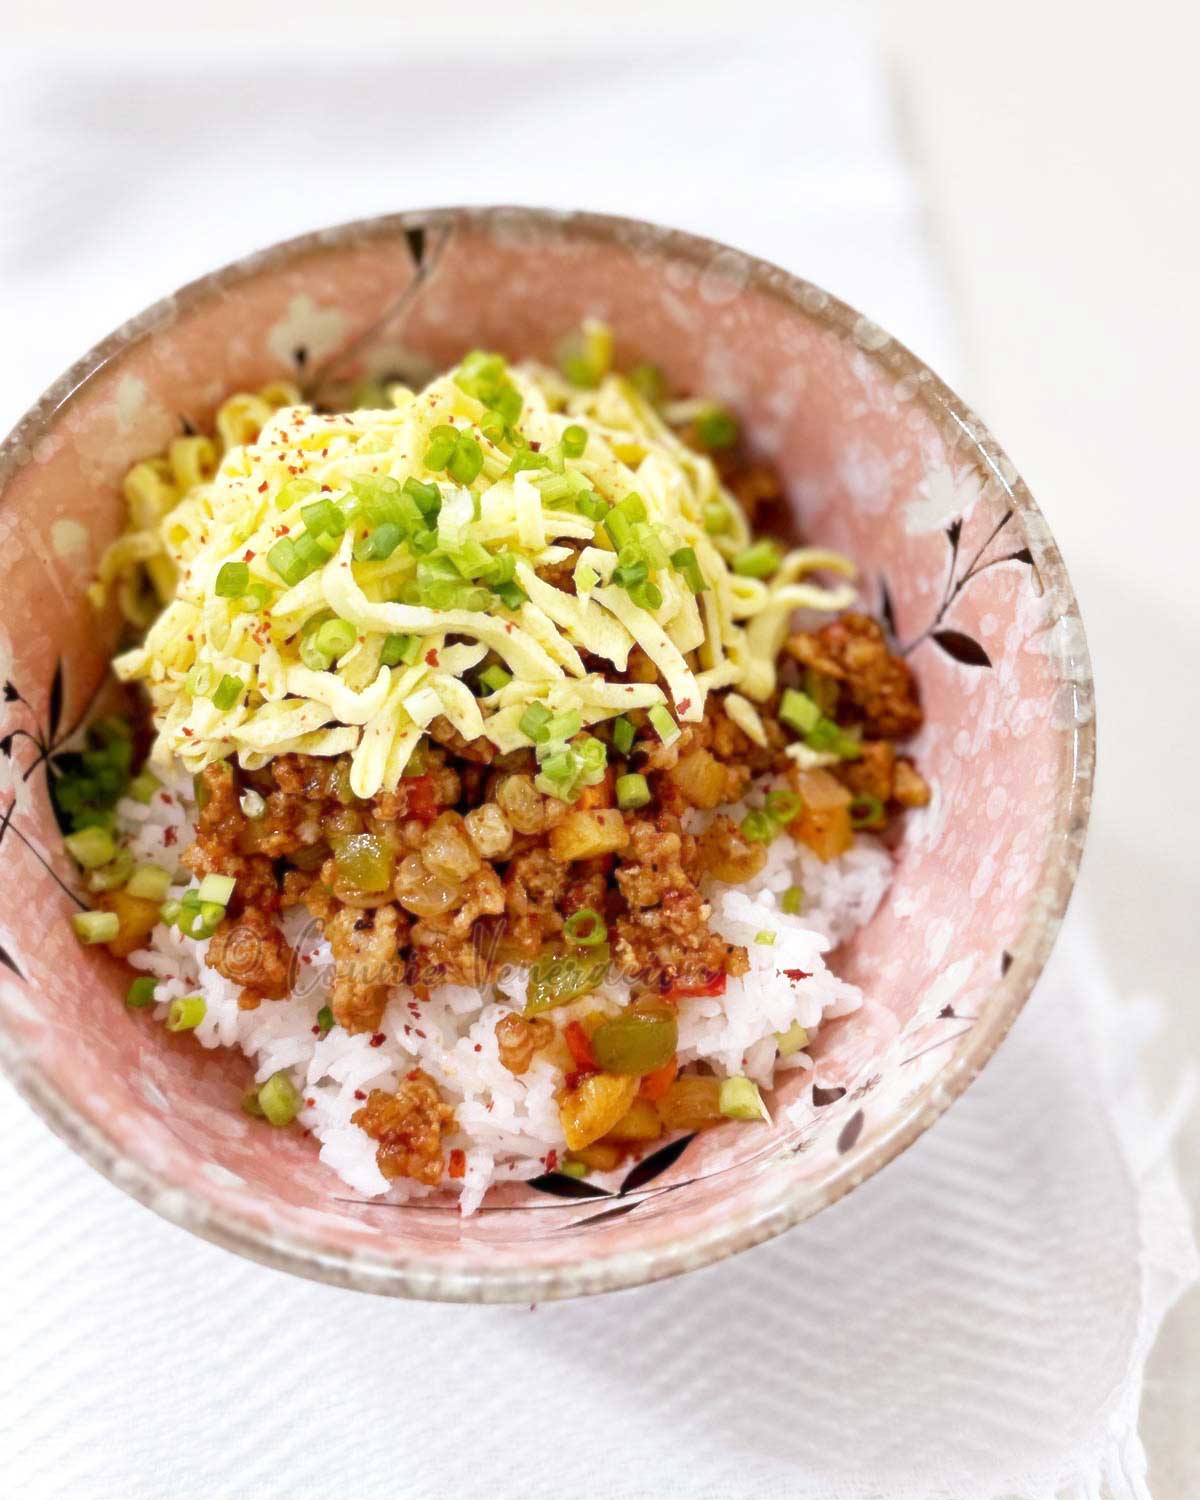 Ground pork with tomatoes, chilies and sultanas